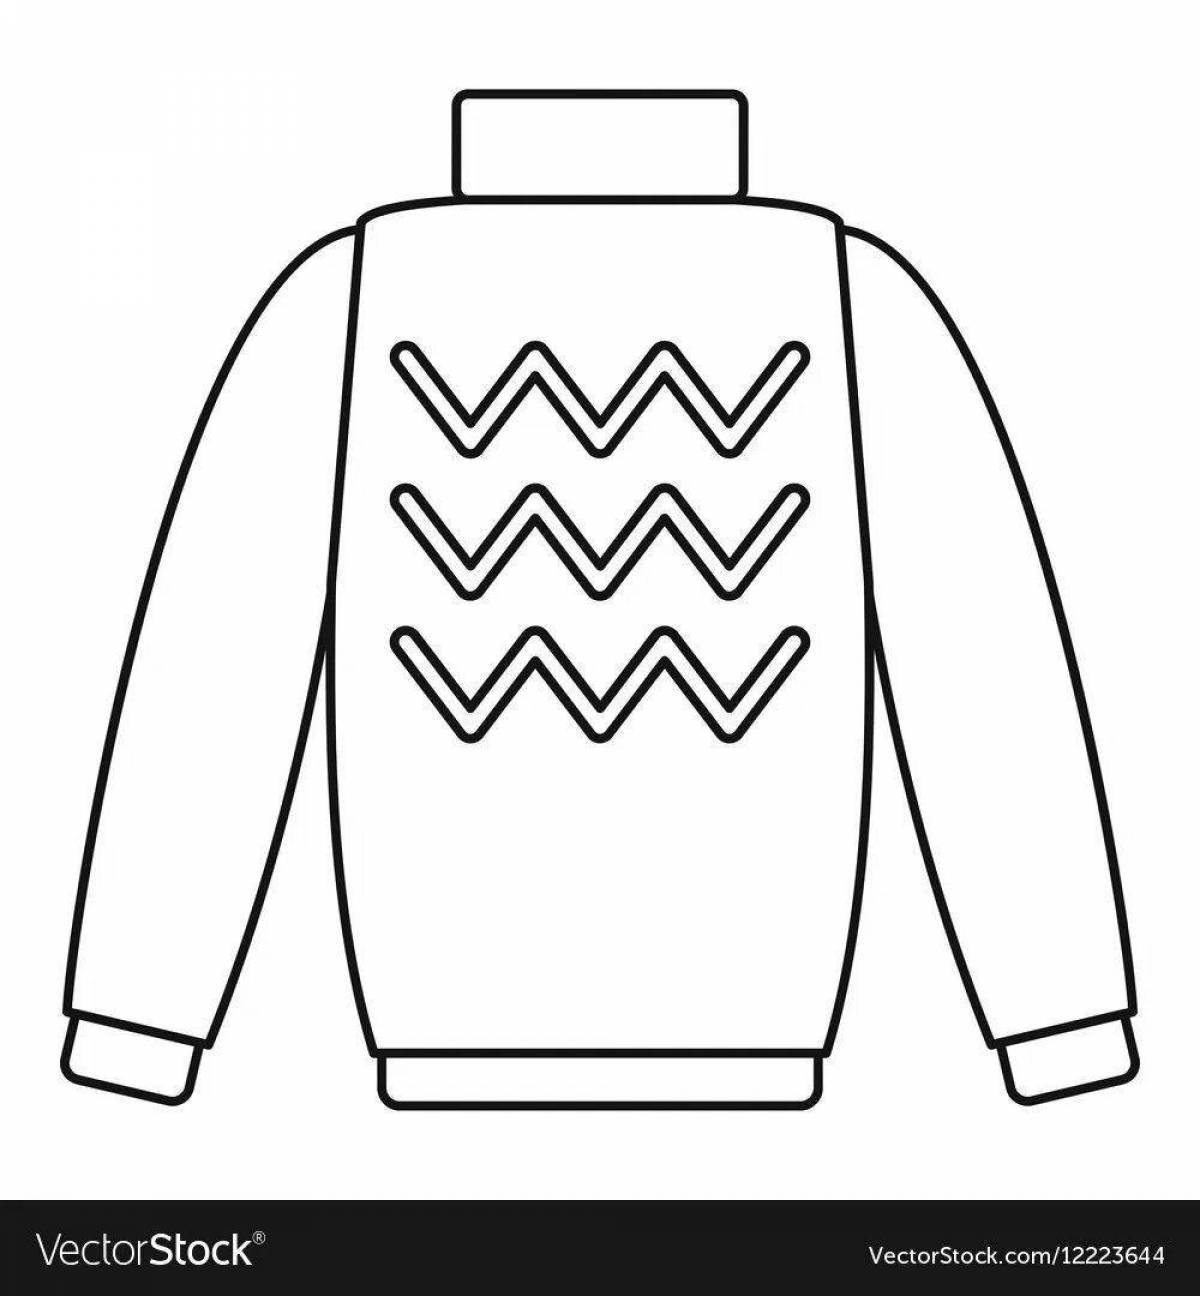 Playful Preschool Sweater Coloring Page